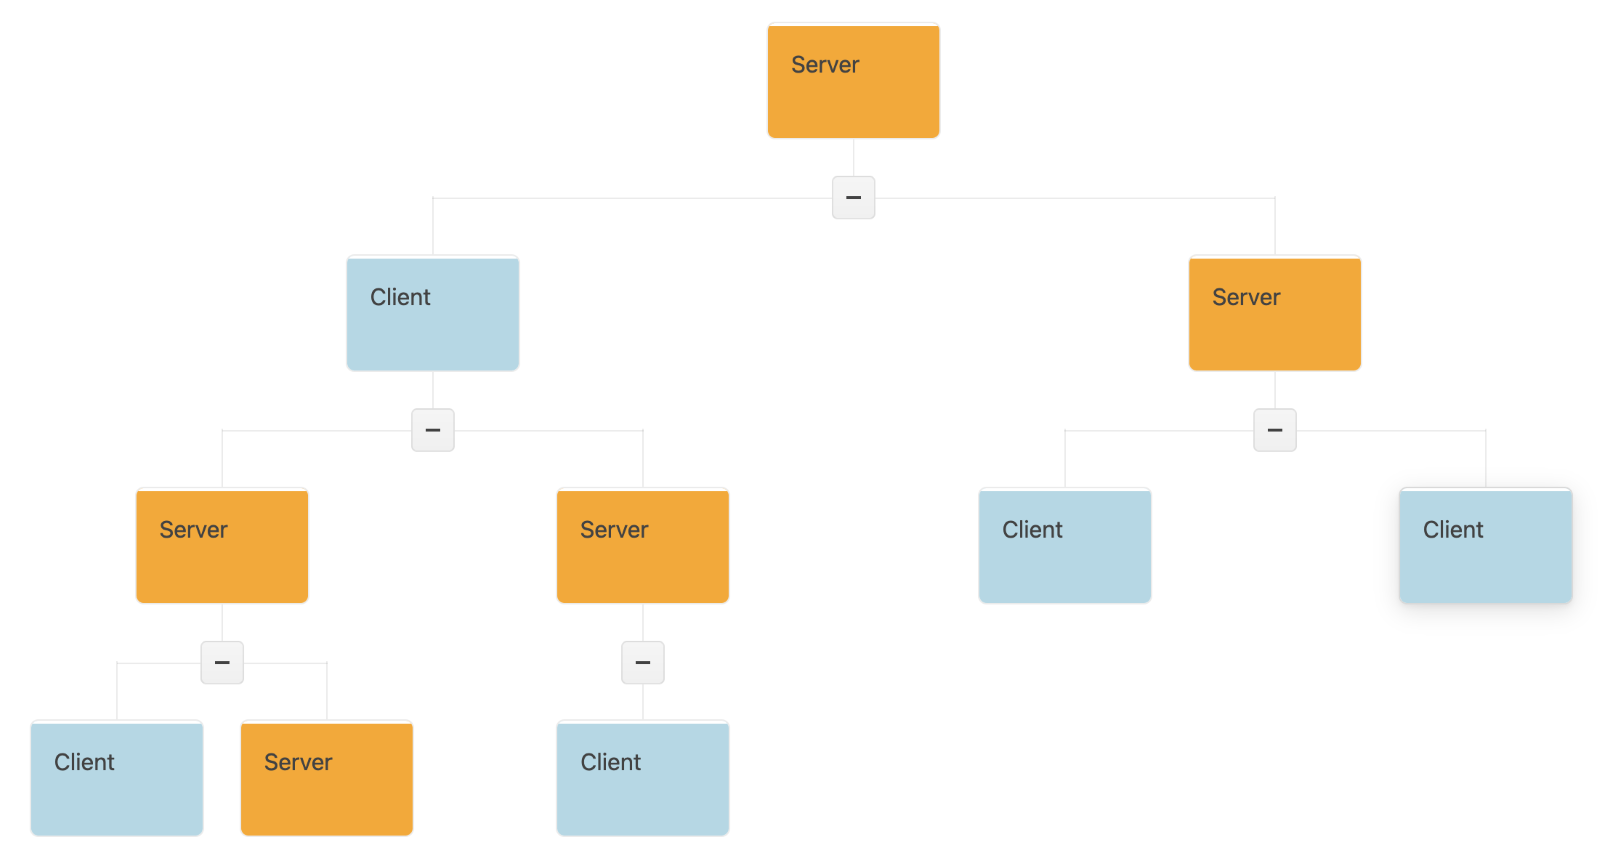 In an org chart, under server, there is a client on the left and a server on the right. Under that tier 2 client are two servers. One server contains both a client and a server, while the other contains only a client. The tier 2 server on the right has two clients below it.